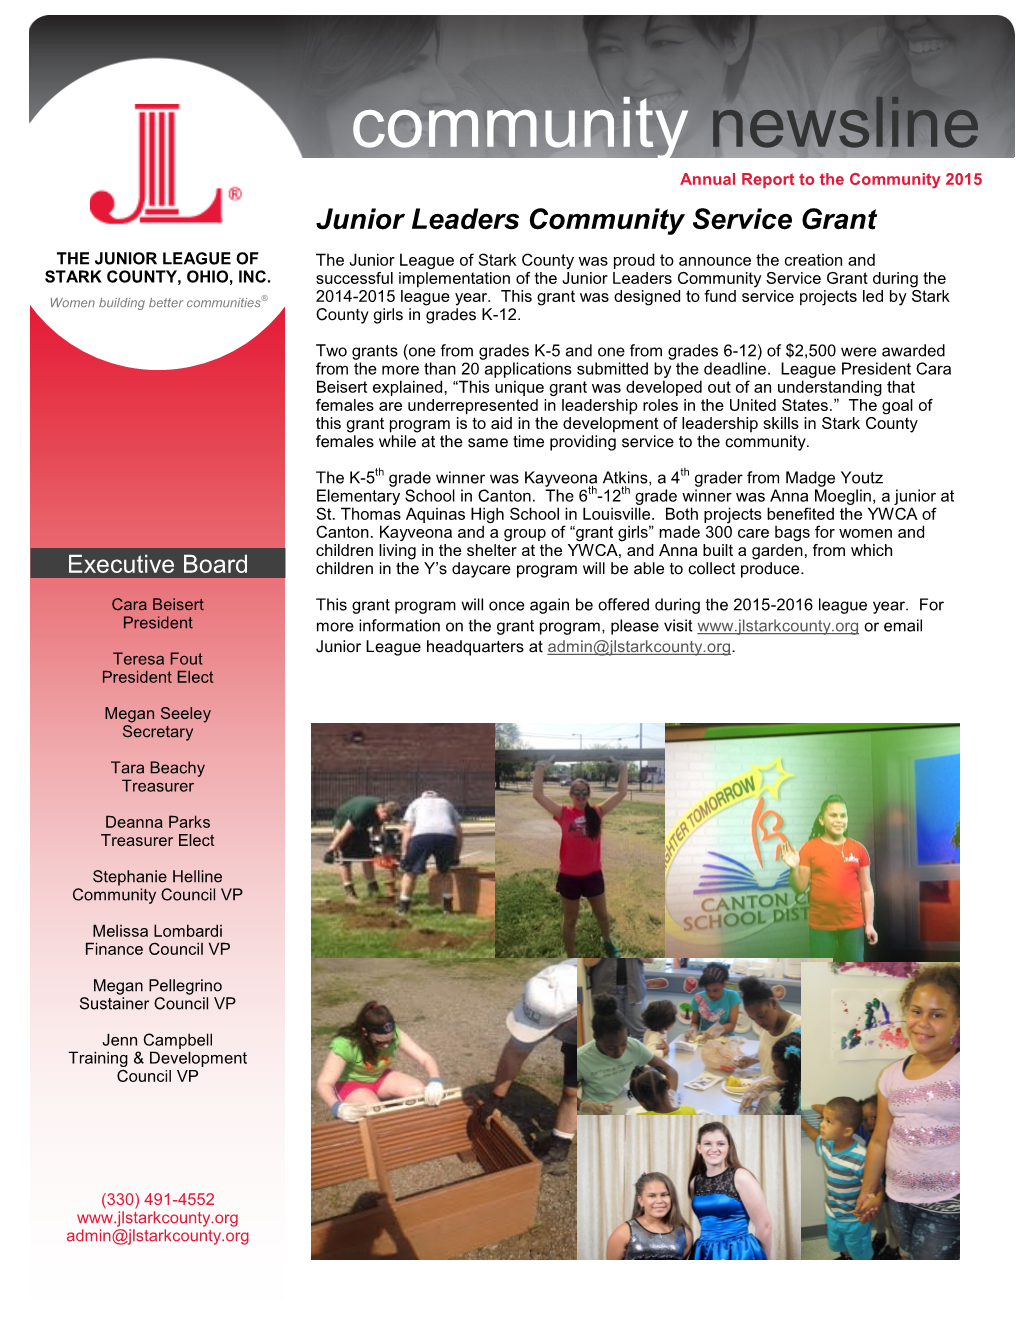 Community Newsline Annual Report to the Community 2015 Junior Leaders Community Service Grant